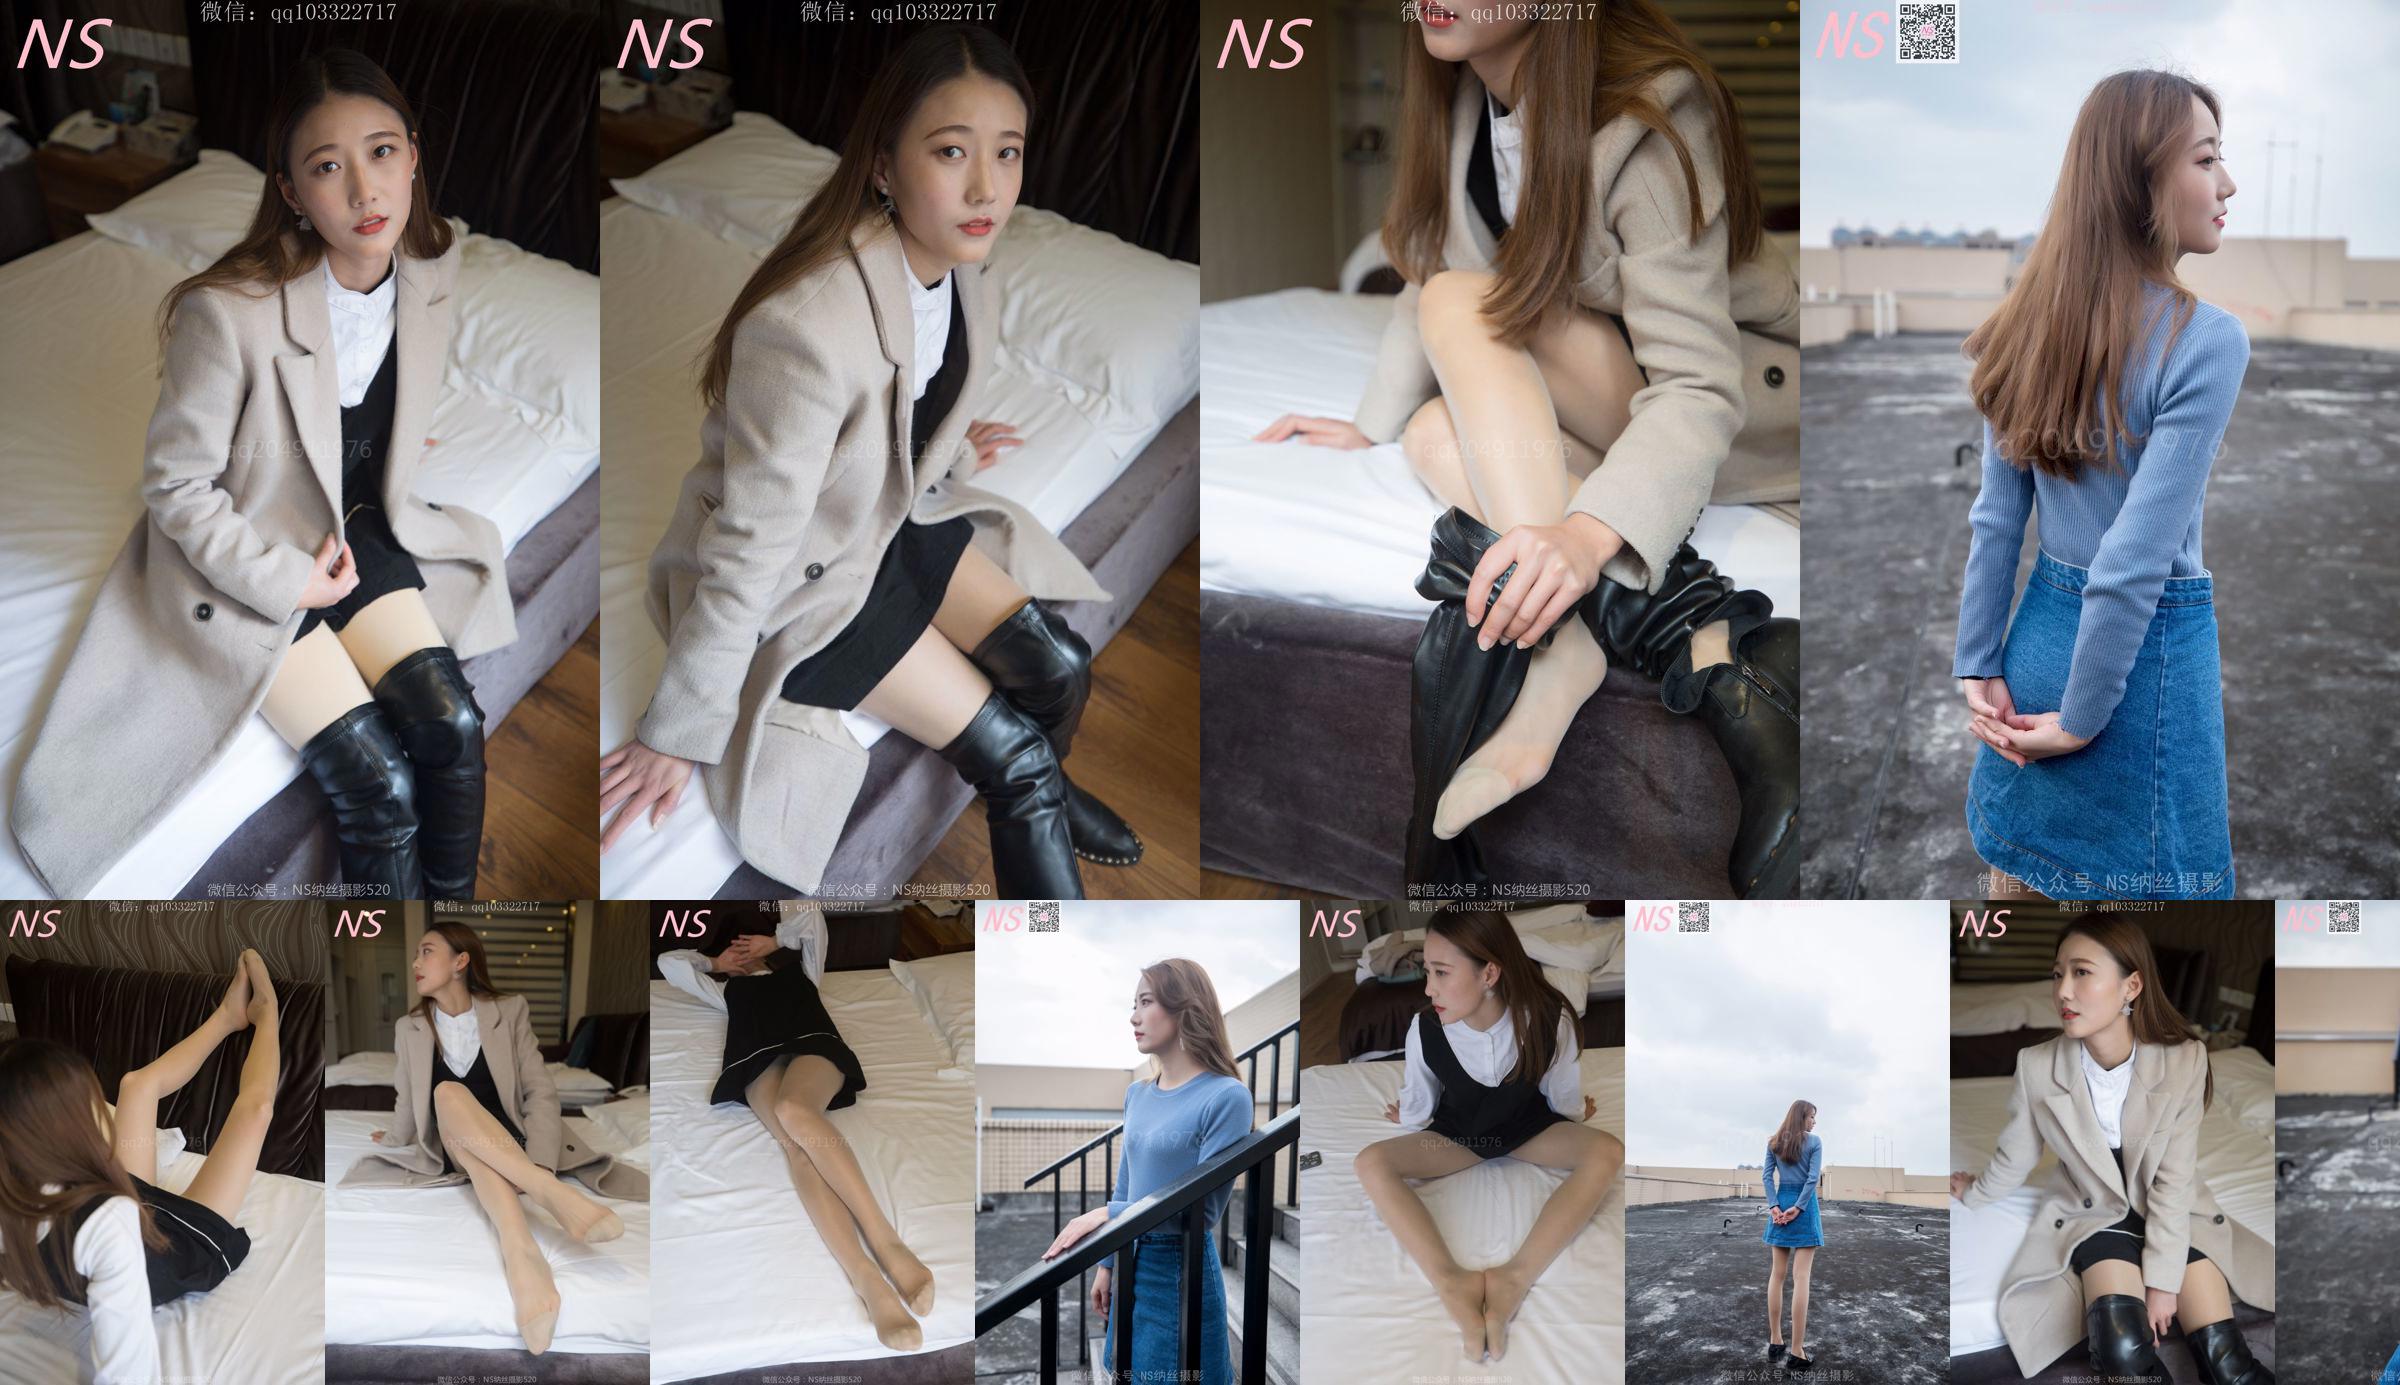 Shu Yi "The Encounter With The Boots Off The Stockings" [Nass Photography] No.b46ada หน้า 40